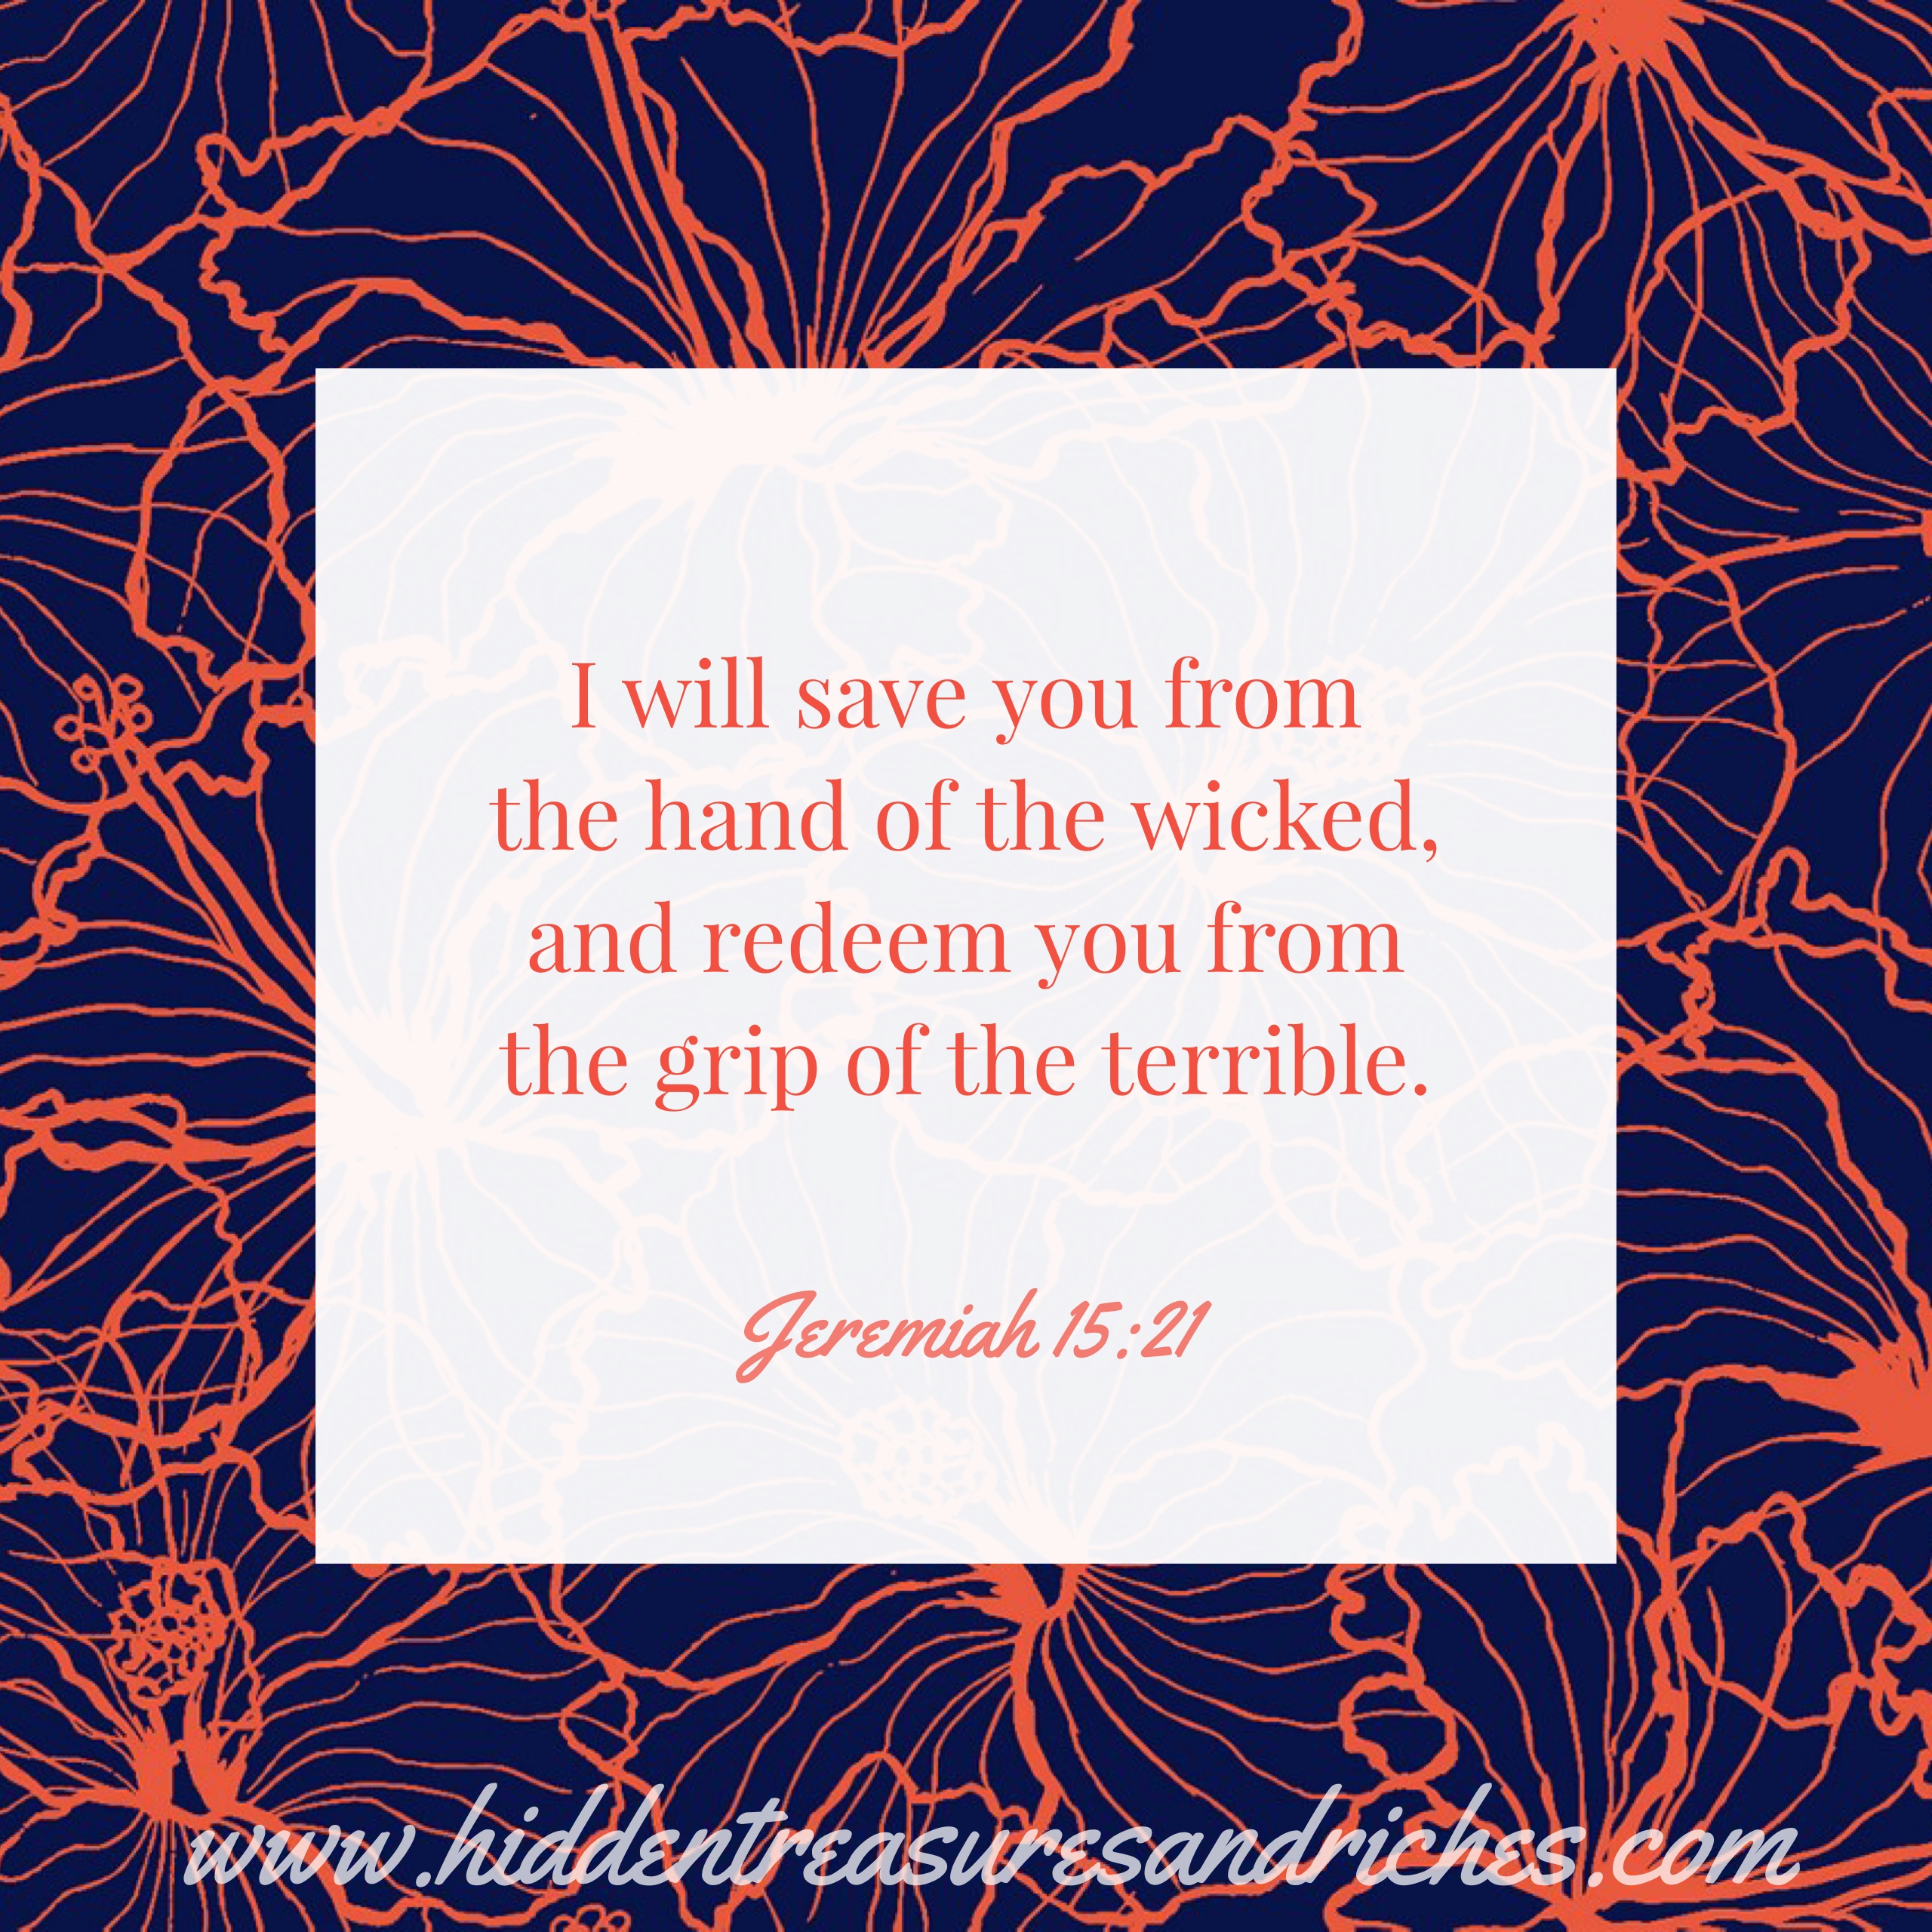 Redeemed, protection